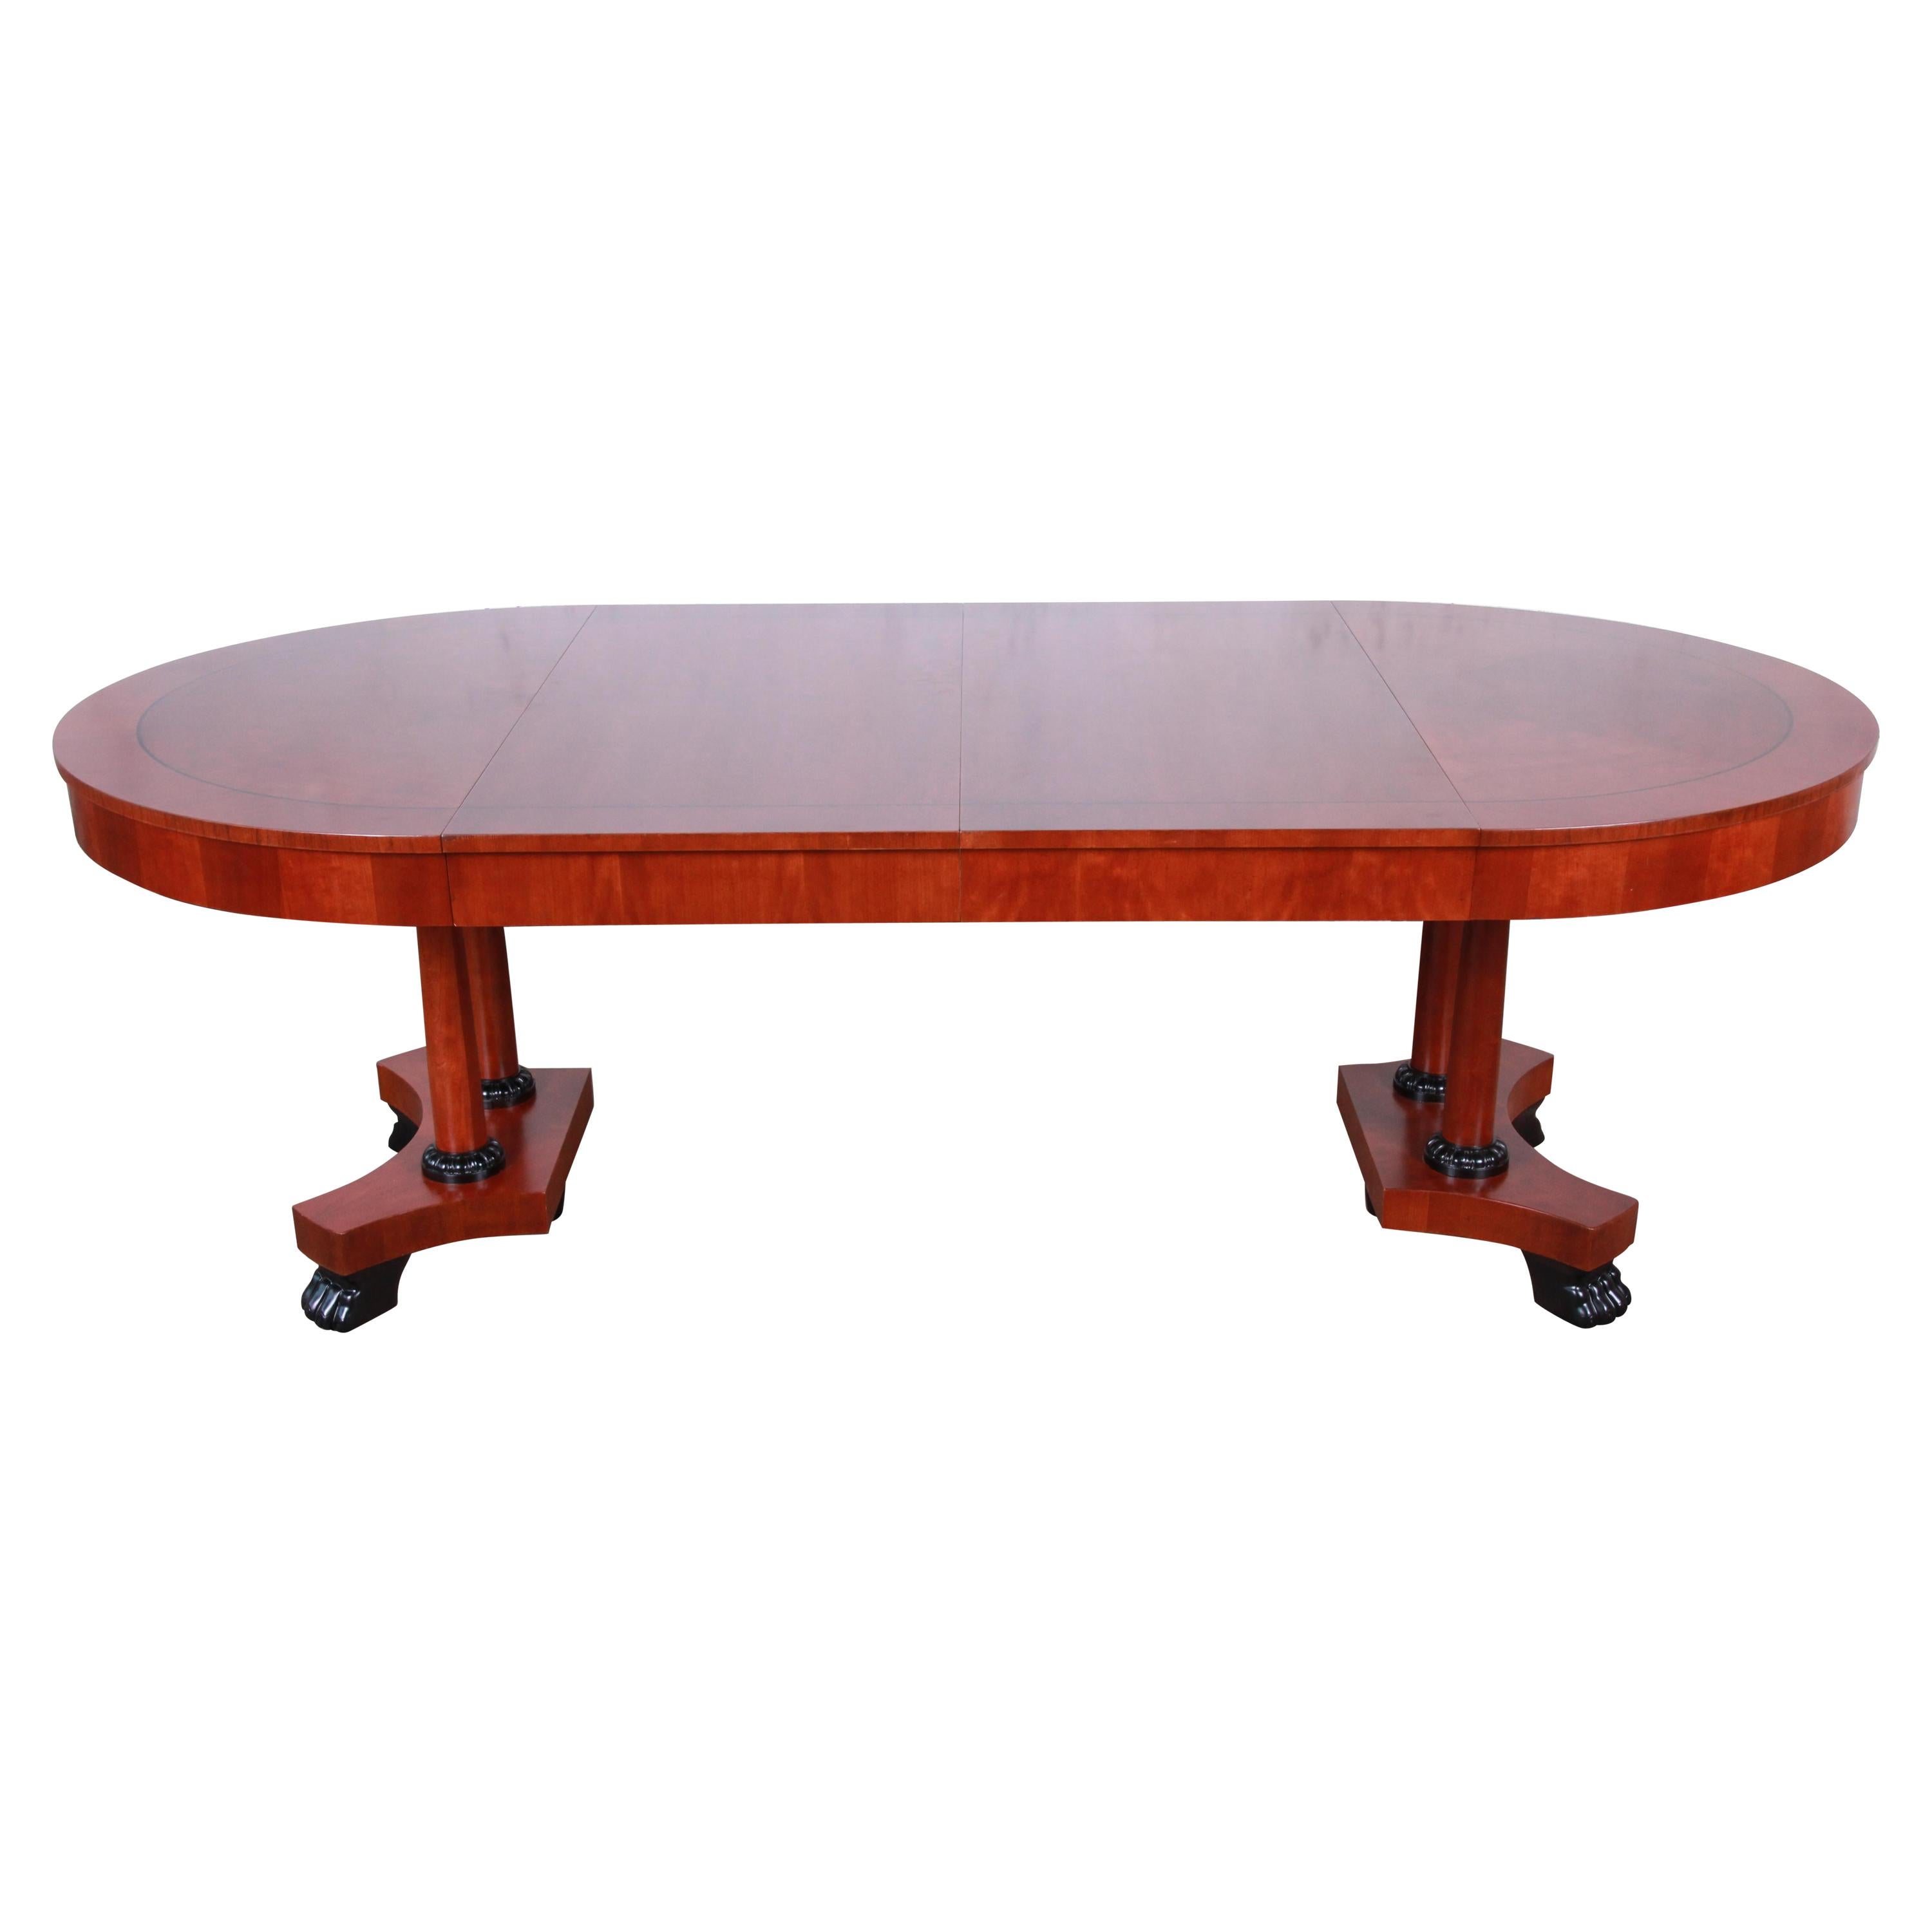 Baker Furniture Palladian Collection Neoclassical Cherry Wood Dining Table